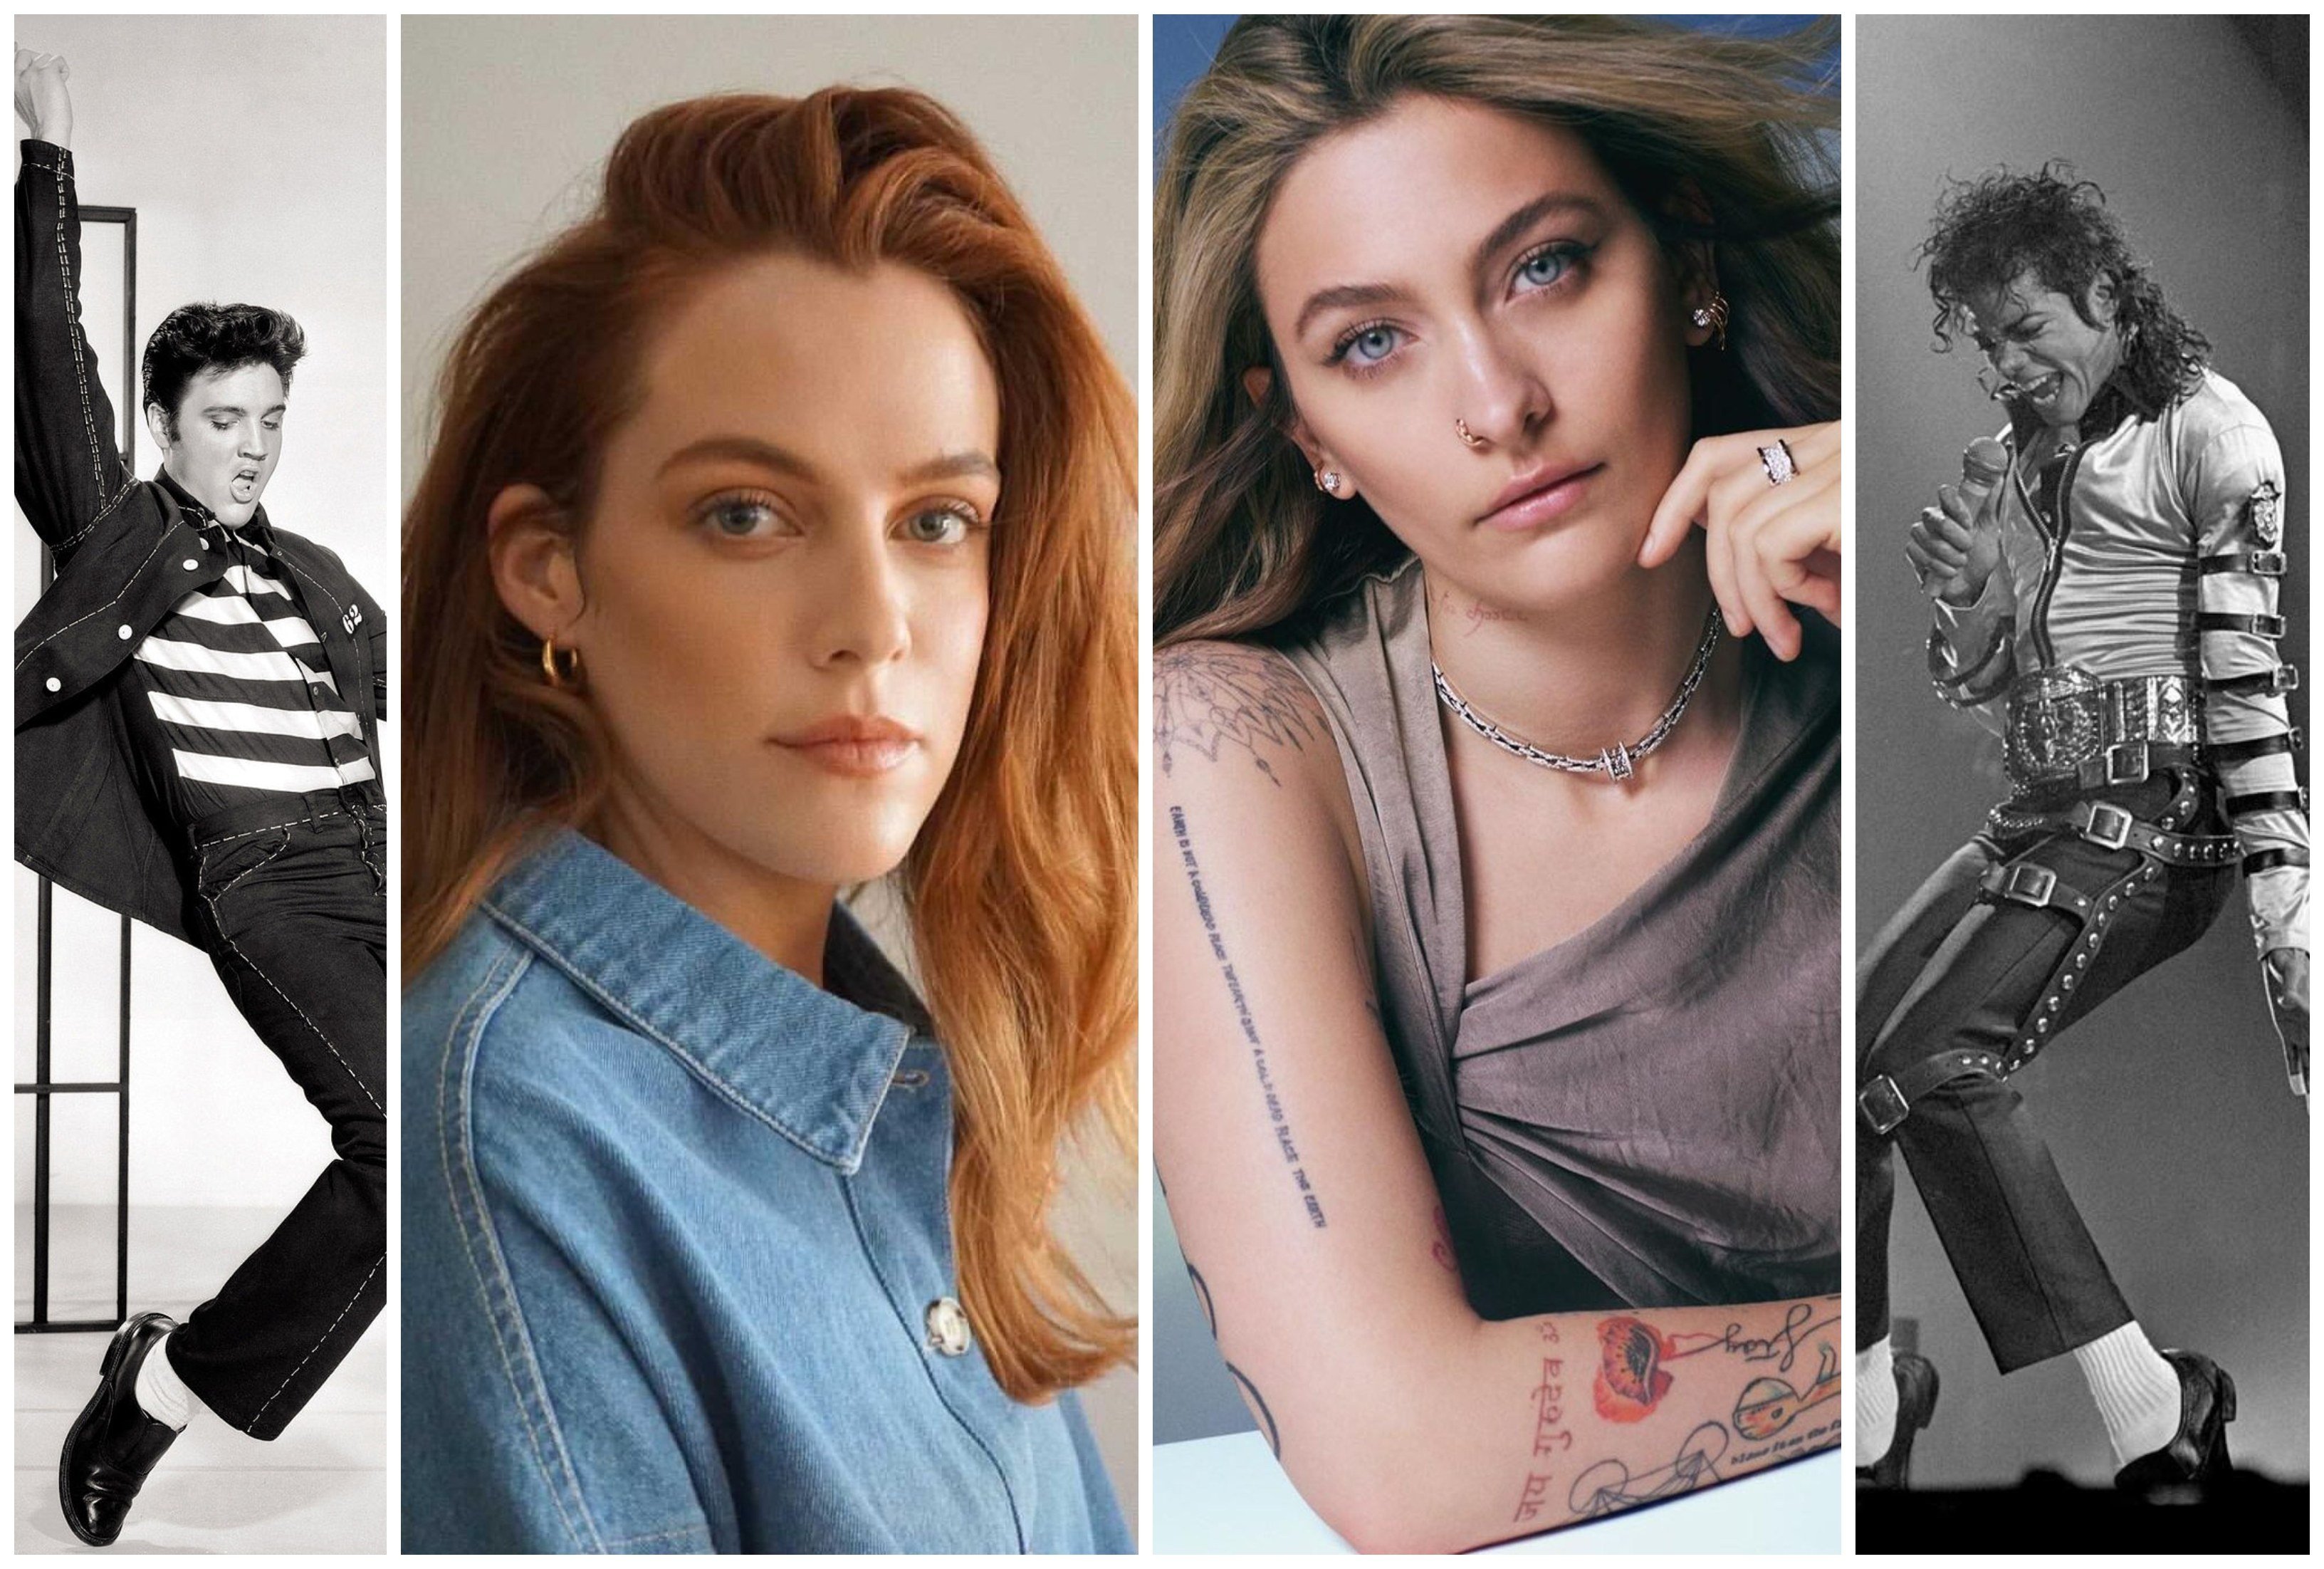 Riley Keough and Paris Jackson, granddaughter of Elvis Presley and daughter of Michael Jackson respectively, are carving their own famous paths. Photos: @parisjackson, @rileykeough/Instagram, Handout